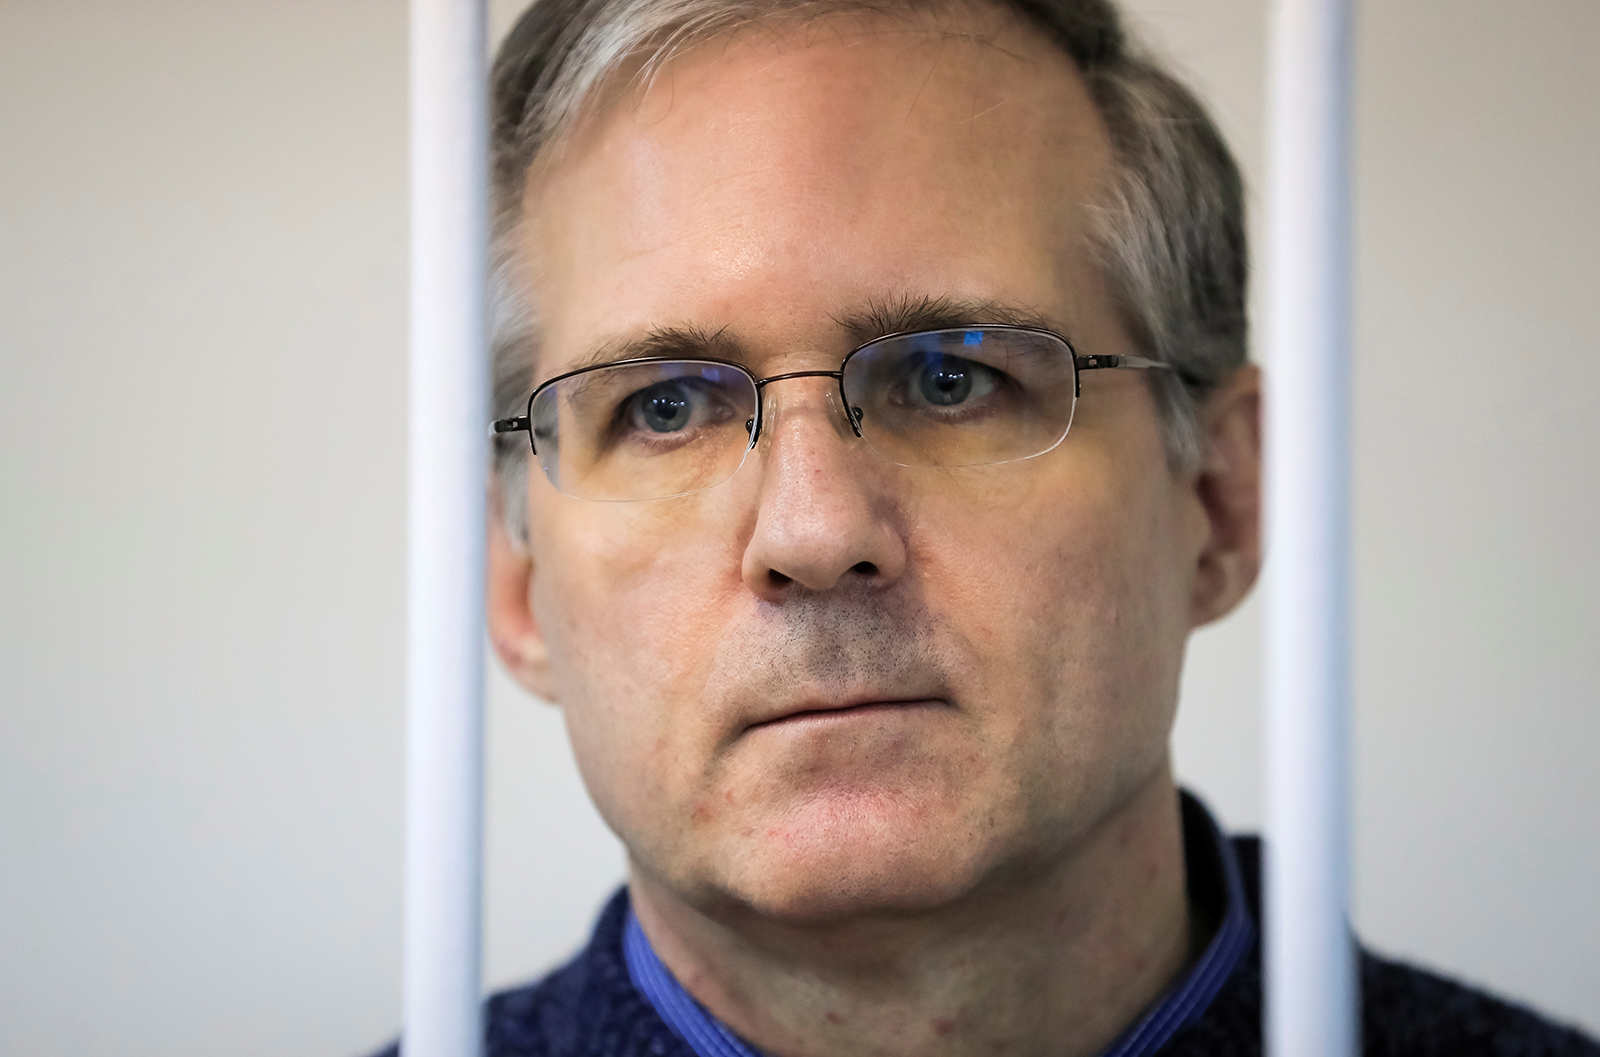 Paul Whelan, who was detained and accused of espionage, stands inside a defendants' cage during a court hearing on extending his pre-trial detention, in Moscow, Russia on October 24, 2019. 